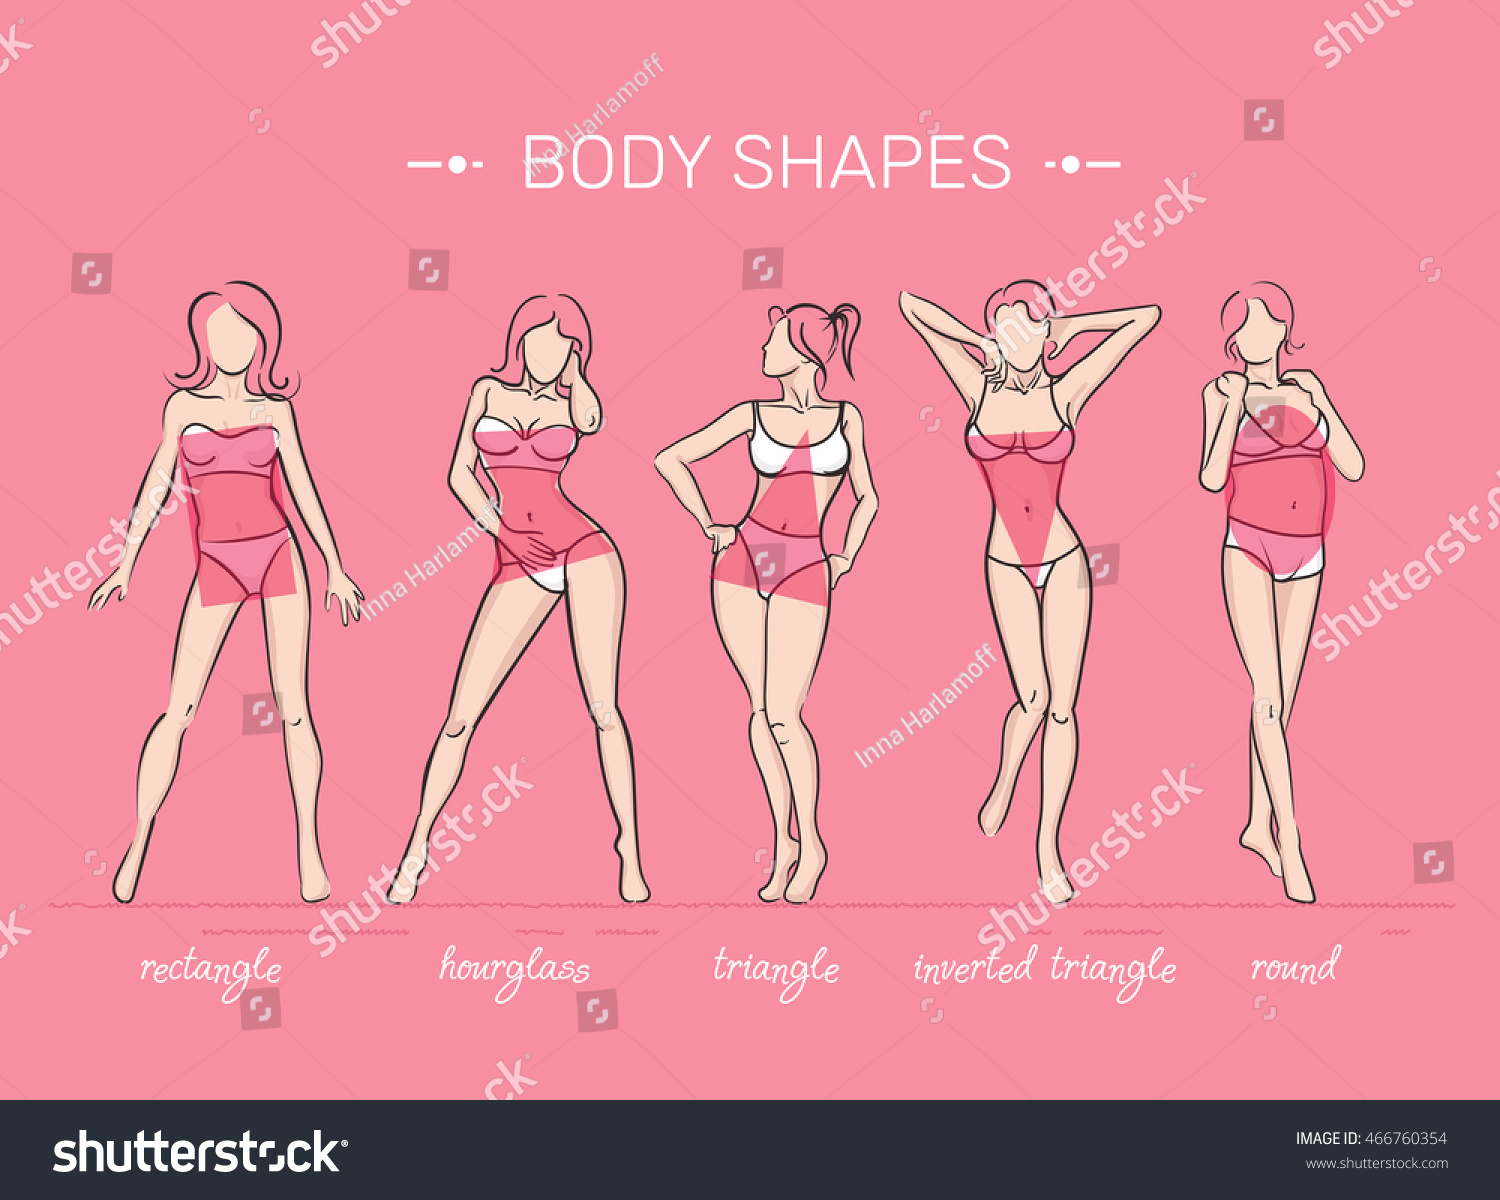 Woman Body Shapes What Your Body Stock Vector 466760354 - Shutterstock